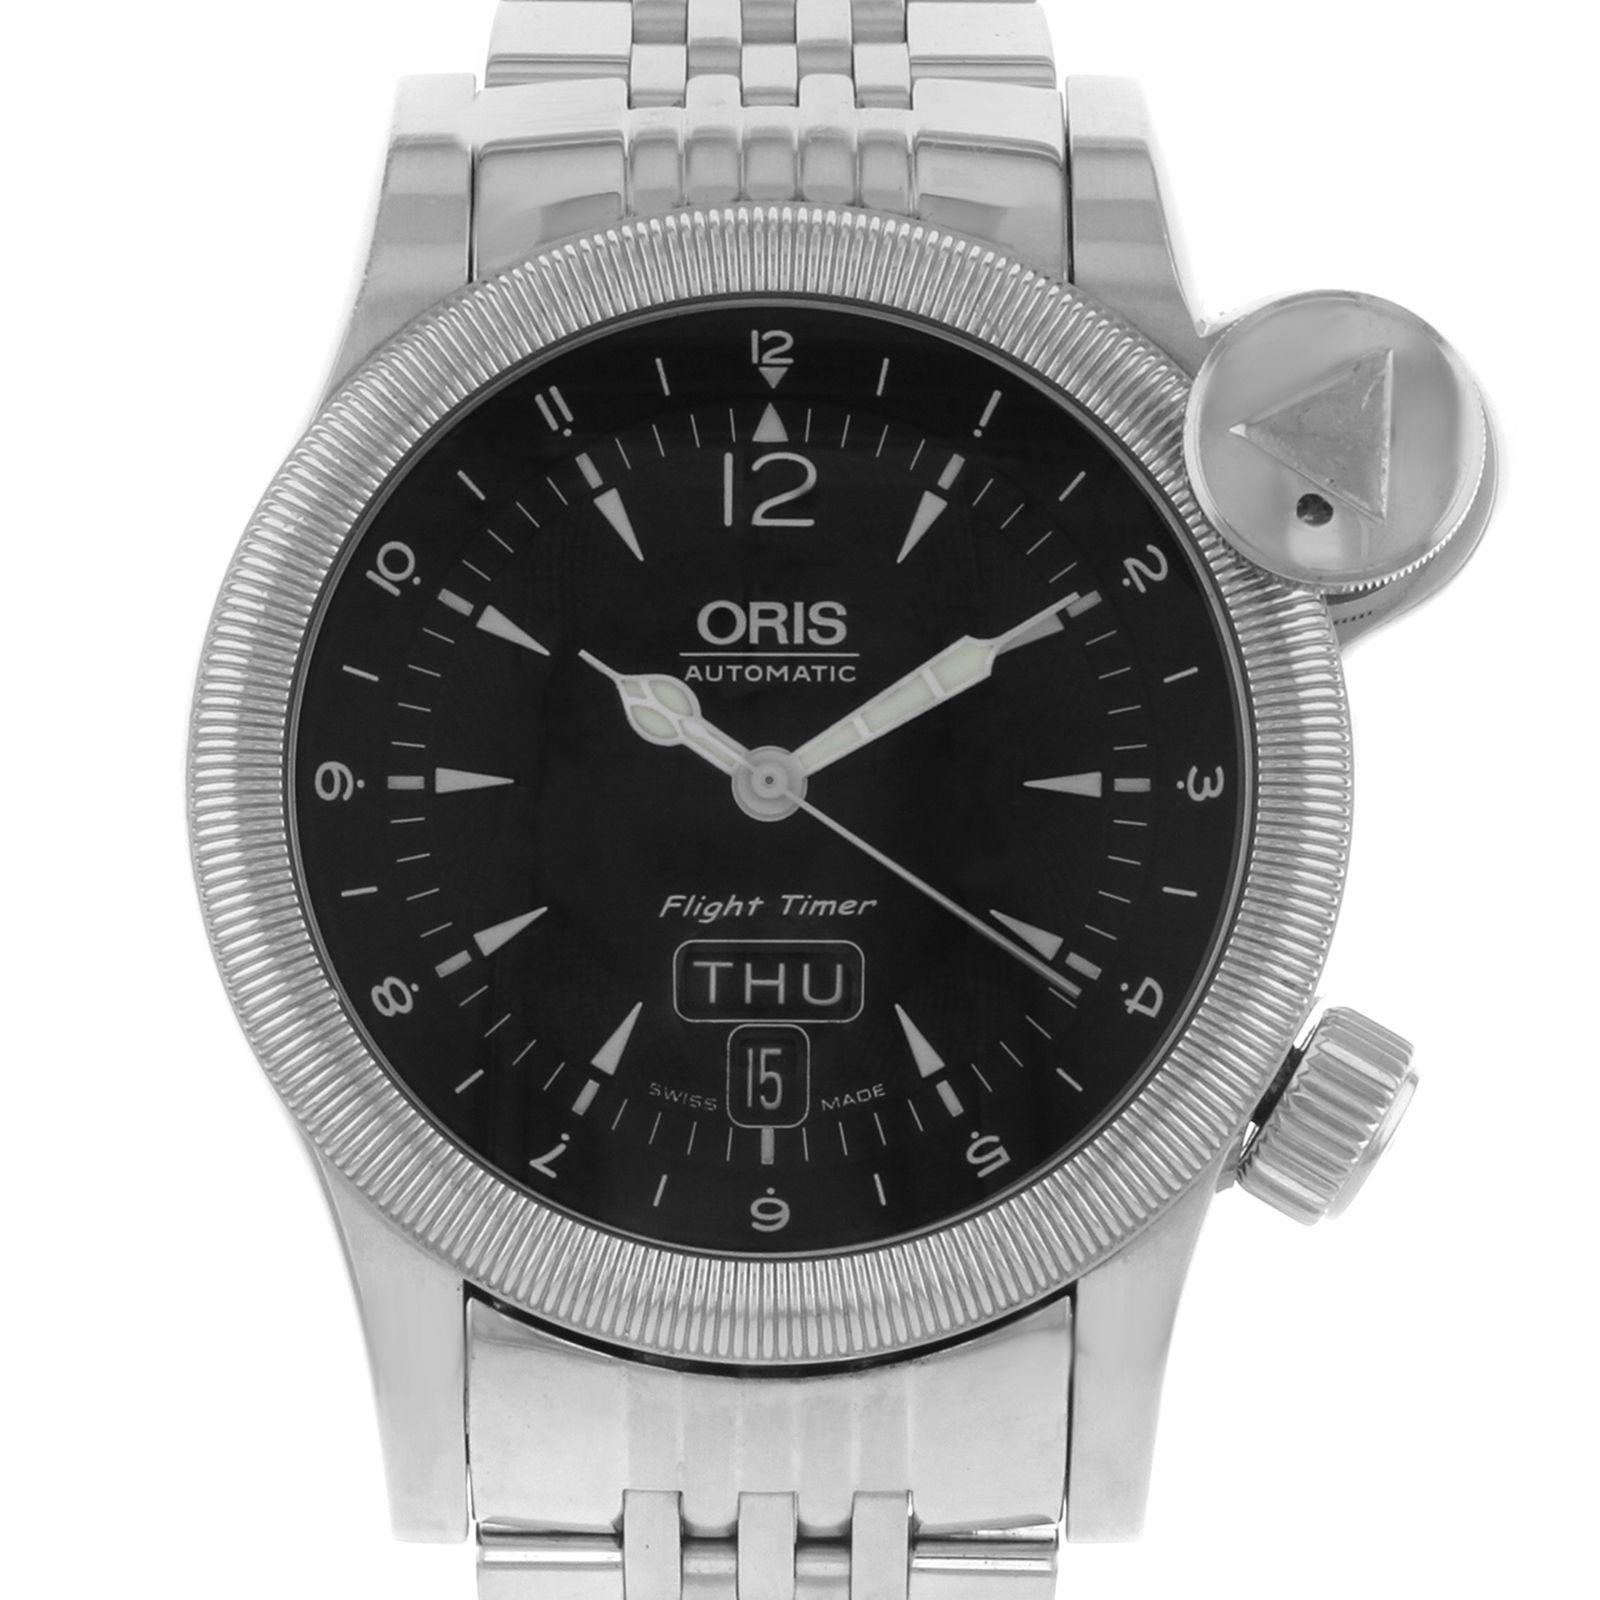 This pre-owned Oris Flight Timer 63575684064 is a beautiful men's timepiece that is powered by mechanical (automatic) movement which is cased in a stainless steel case. It has a round shape face, chronograph, day & date dial and has hand sticks